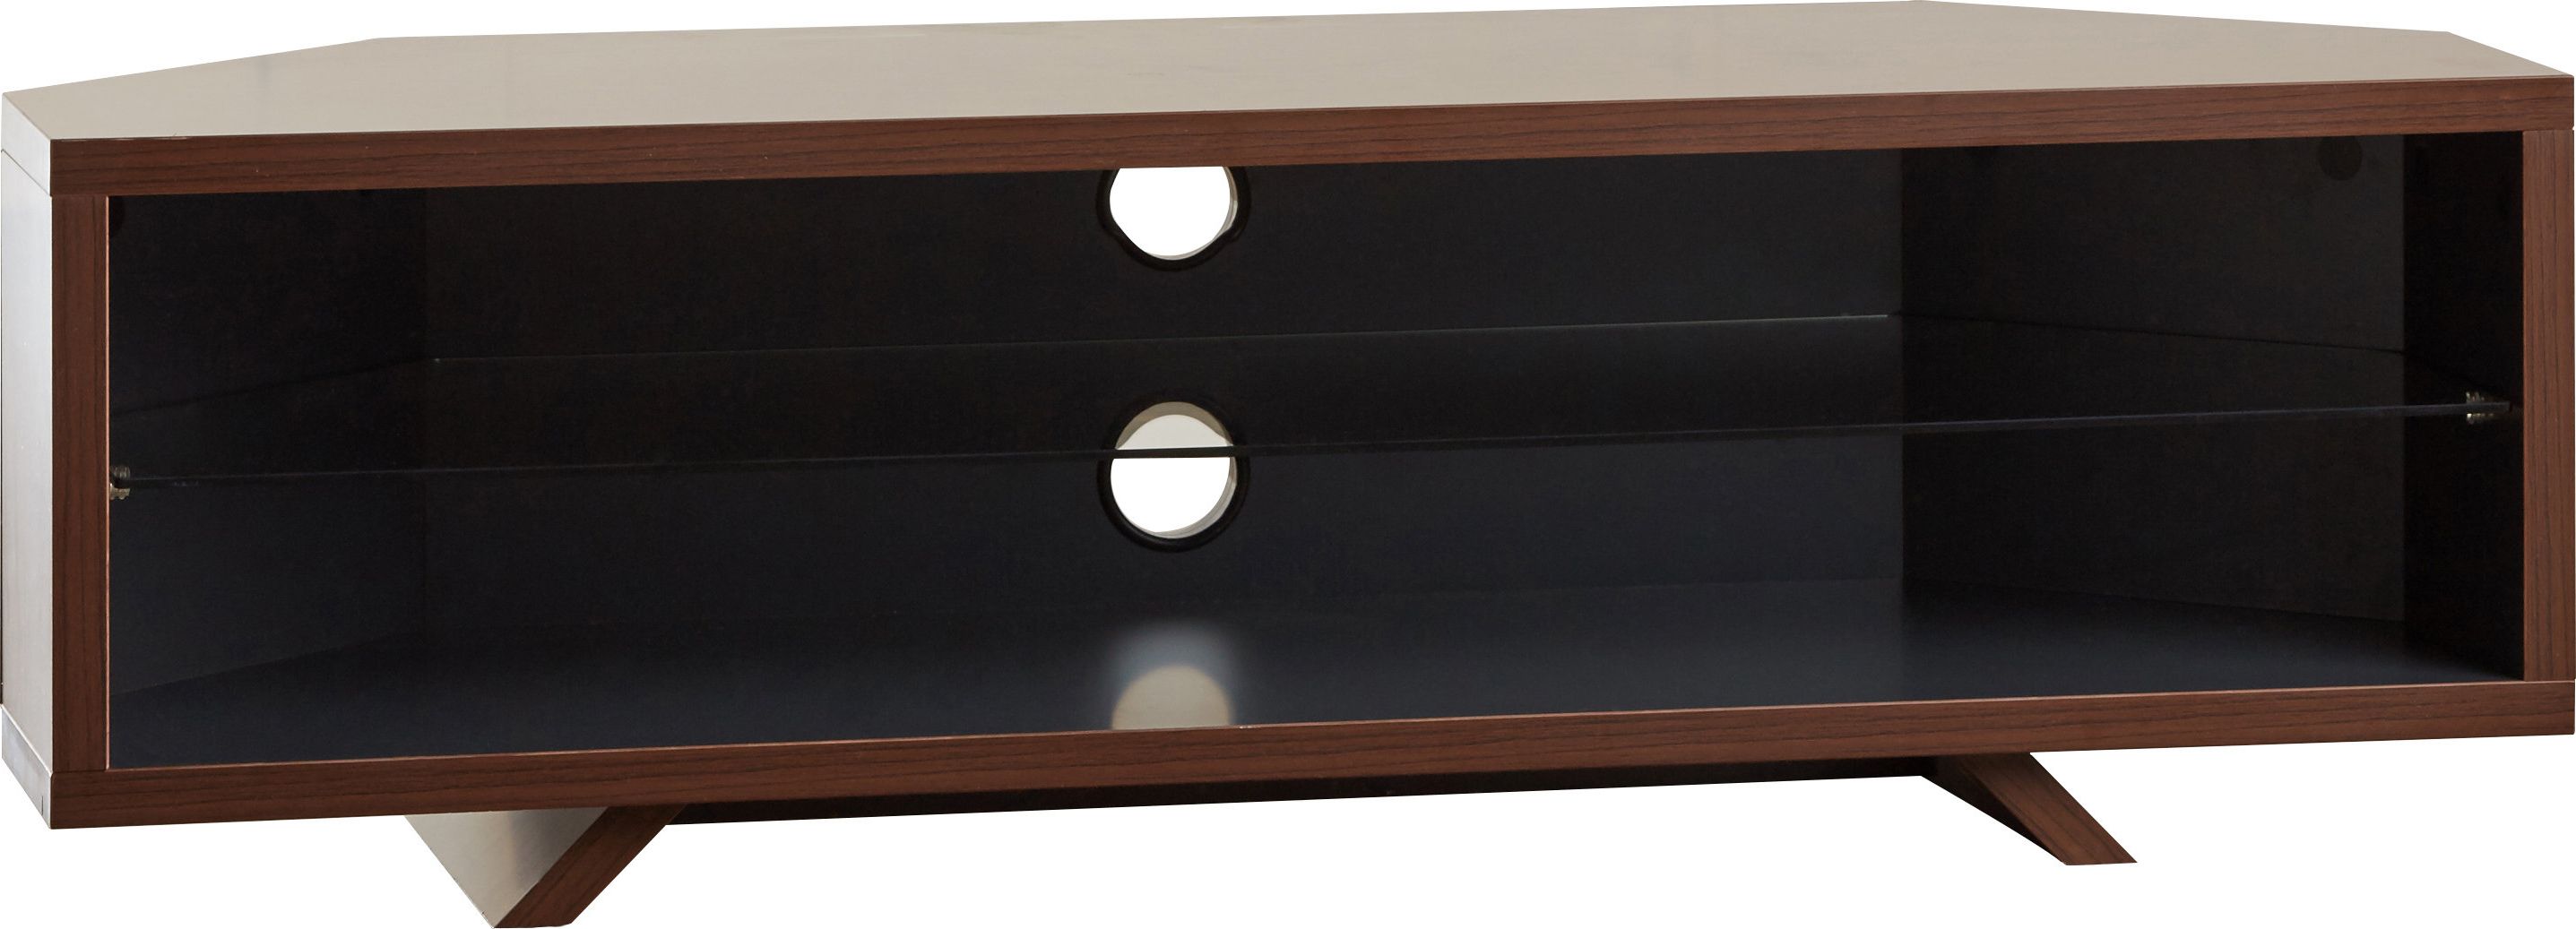 Most Recent Techlink Tv Stands Throughout Techlink Tv Stands & Entertainment Units You'll Love (Photo 5 of 20)